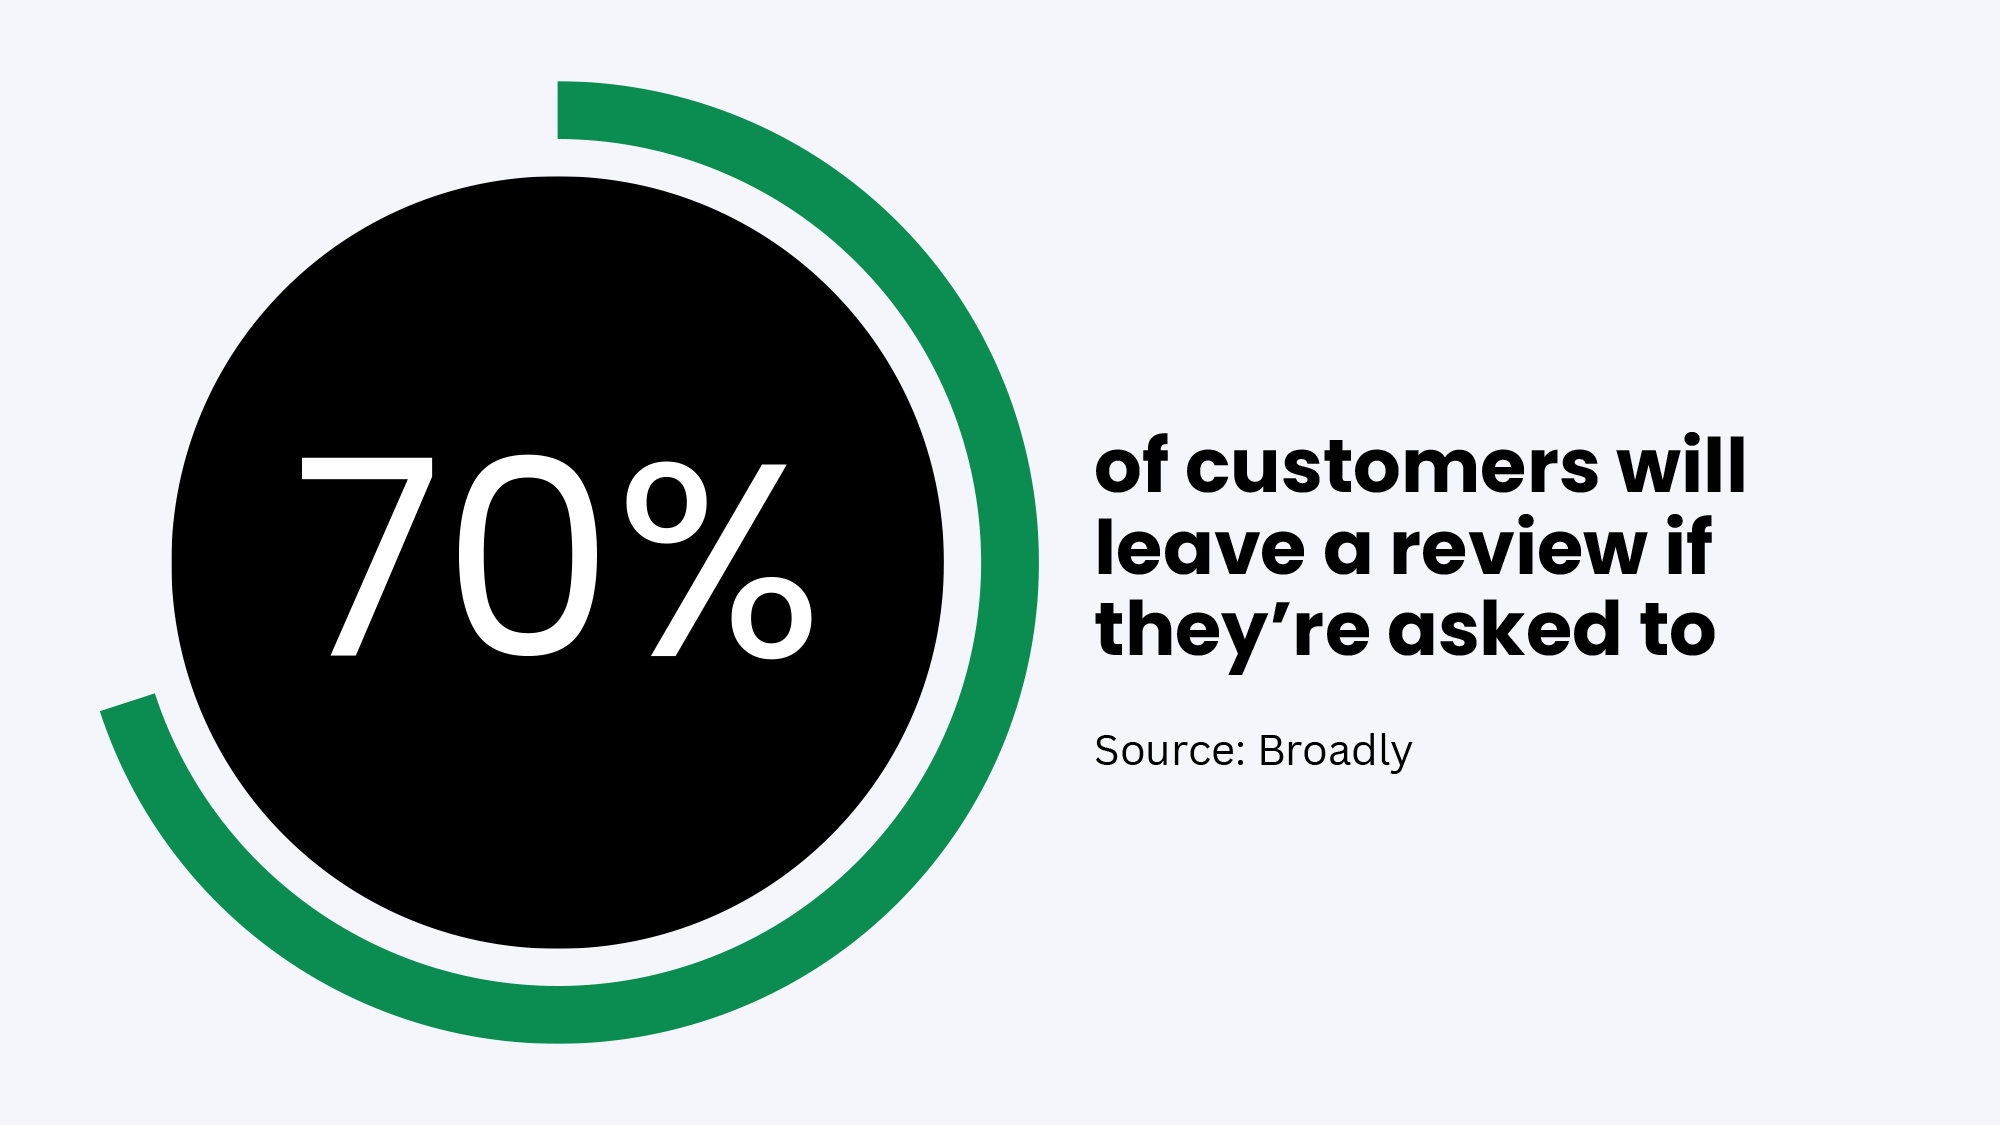 70% of customers will leave a review if they’re asked to